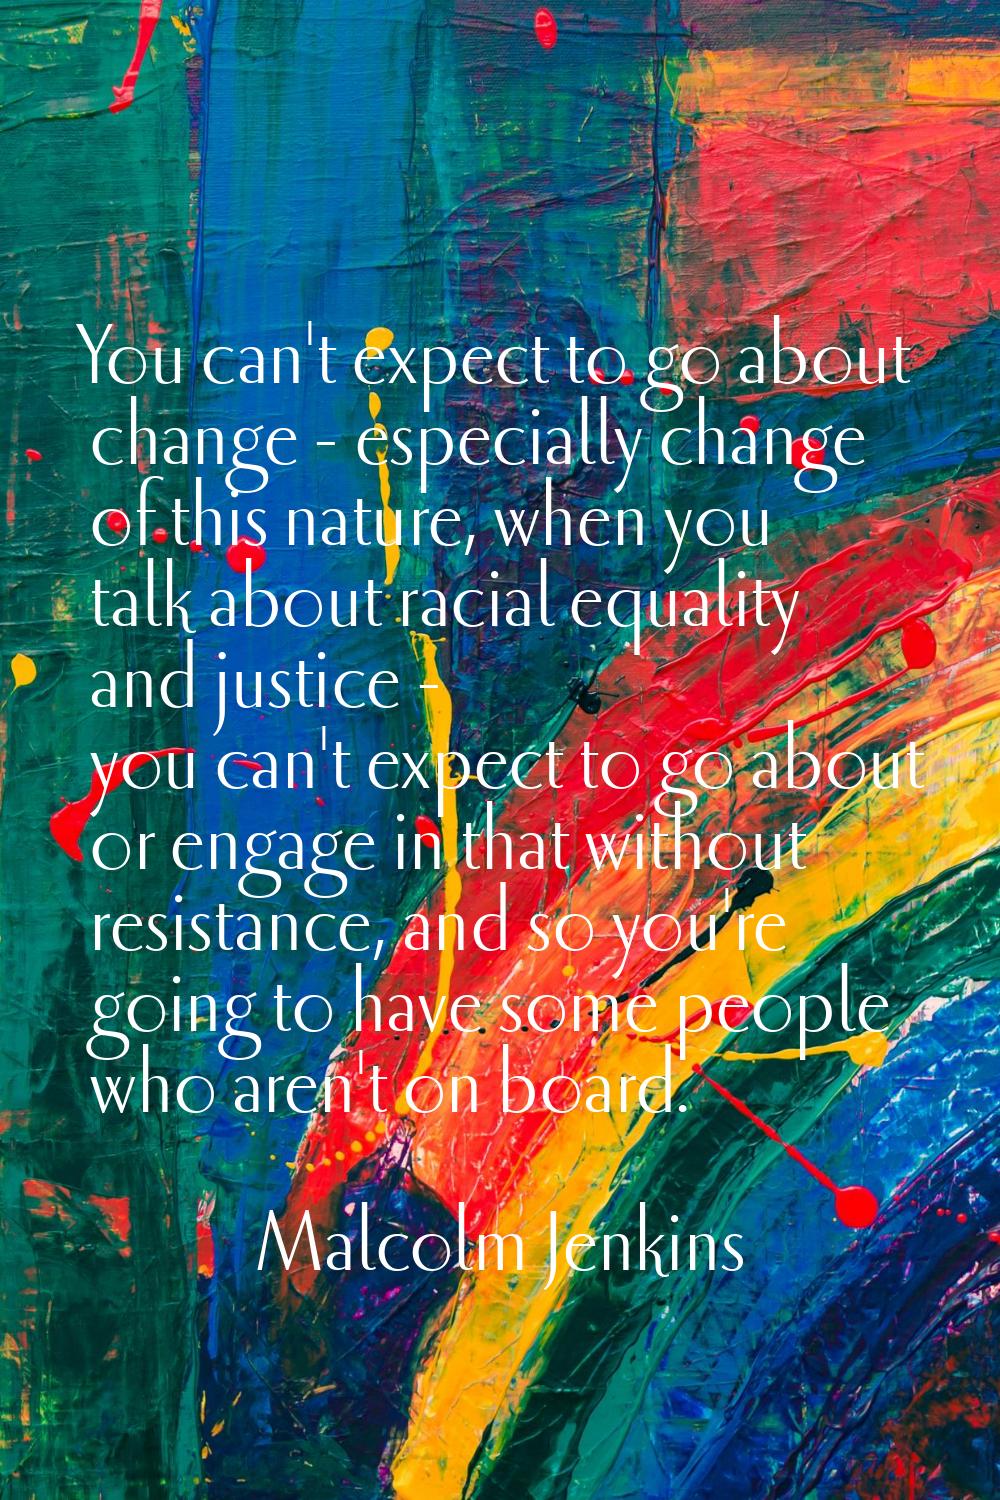 You can't expect to go about change - especially change of this nature, when you talk about racial 